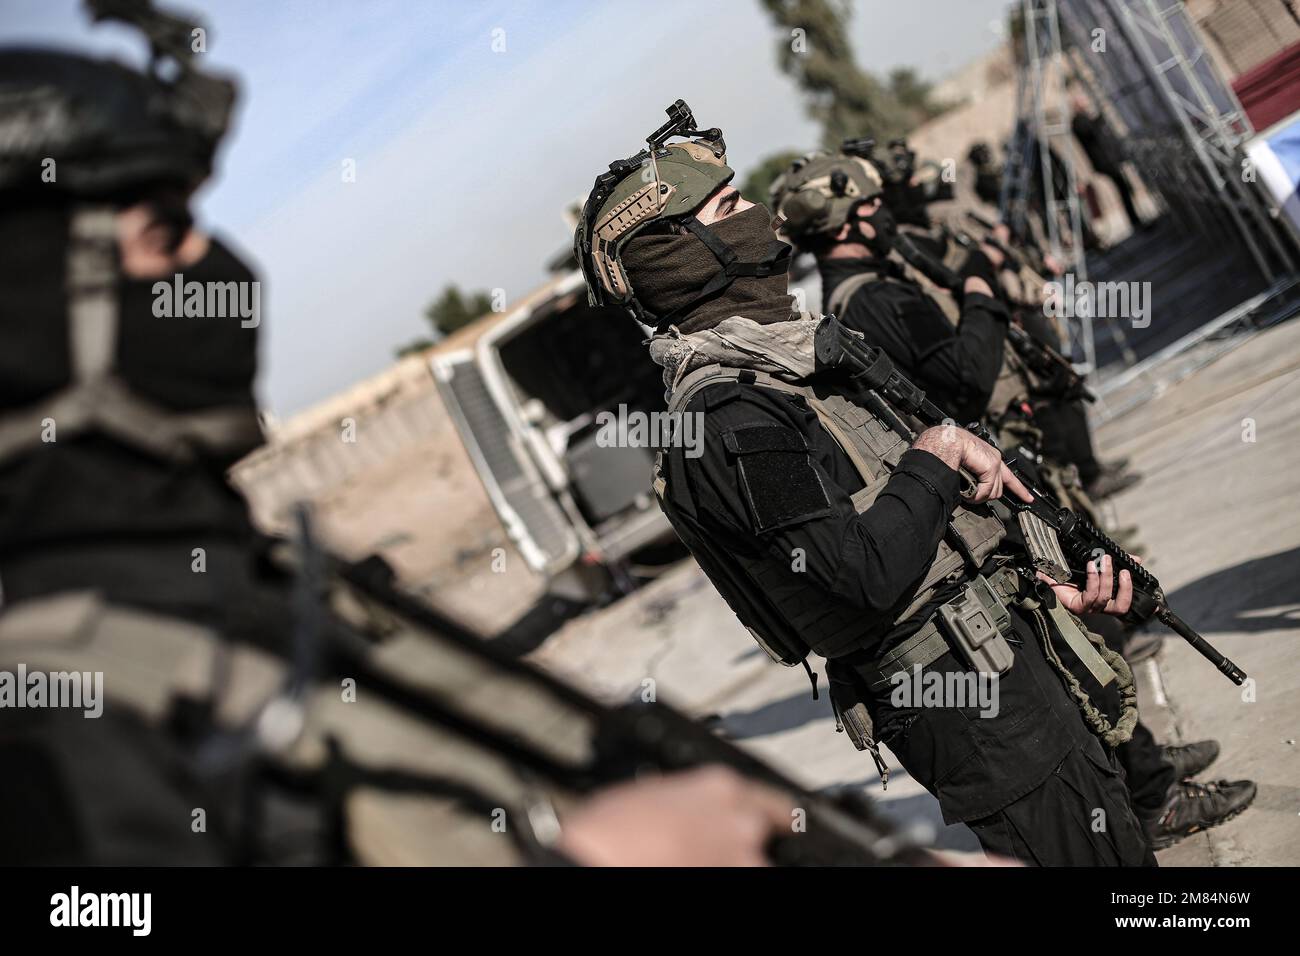 Baghdad, Iraq. 12th Jan, 2023. Security forces stand guard during a press conference held by the Popular Mobilization Forces (PMF) to display seized weapons belonging to the Islamic State (IS). Security Chief of Iraq's Popular Mobilization Forces (PMF), Abu Zainab al-Lami announced during a press conference that the forces carried out a military operation in Salah al-Din and Diyala provinces to seize various weapons such as Mortar shells, machine guns, explosives, grenades, and other logistical materials. Credit: Ameer Al Mohammedawi/dpa/Alamy Live News Stock Photo